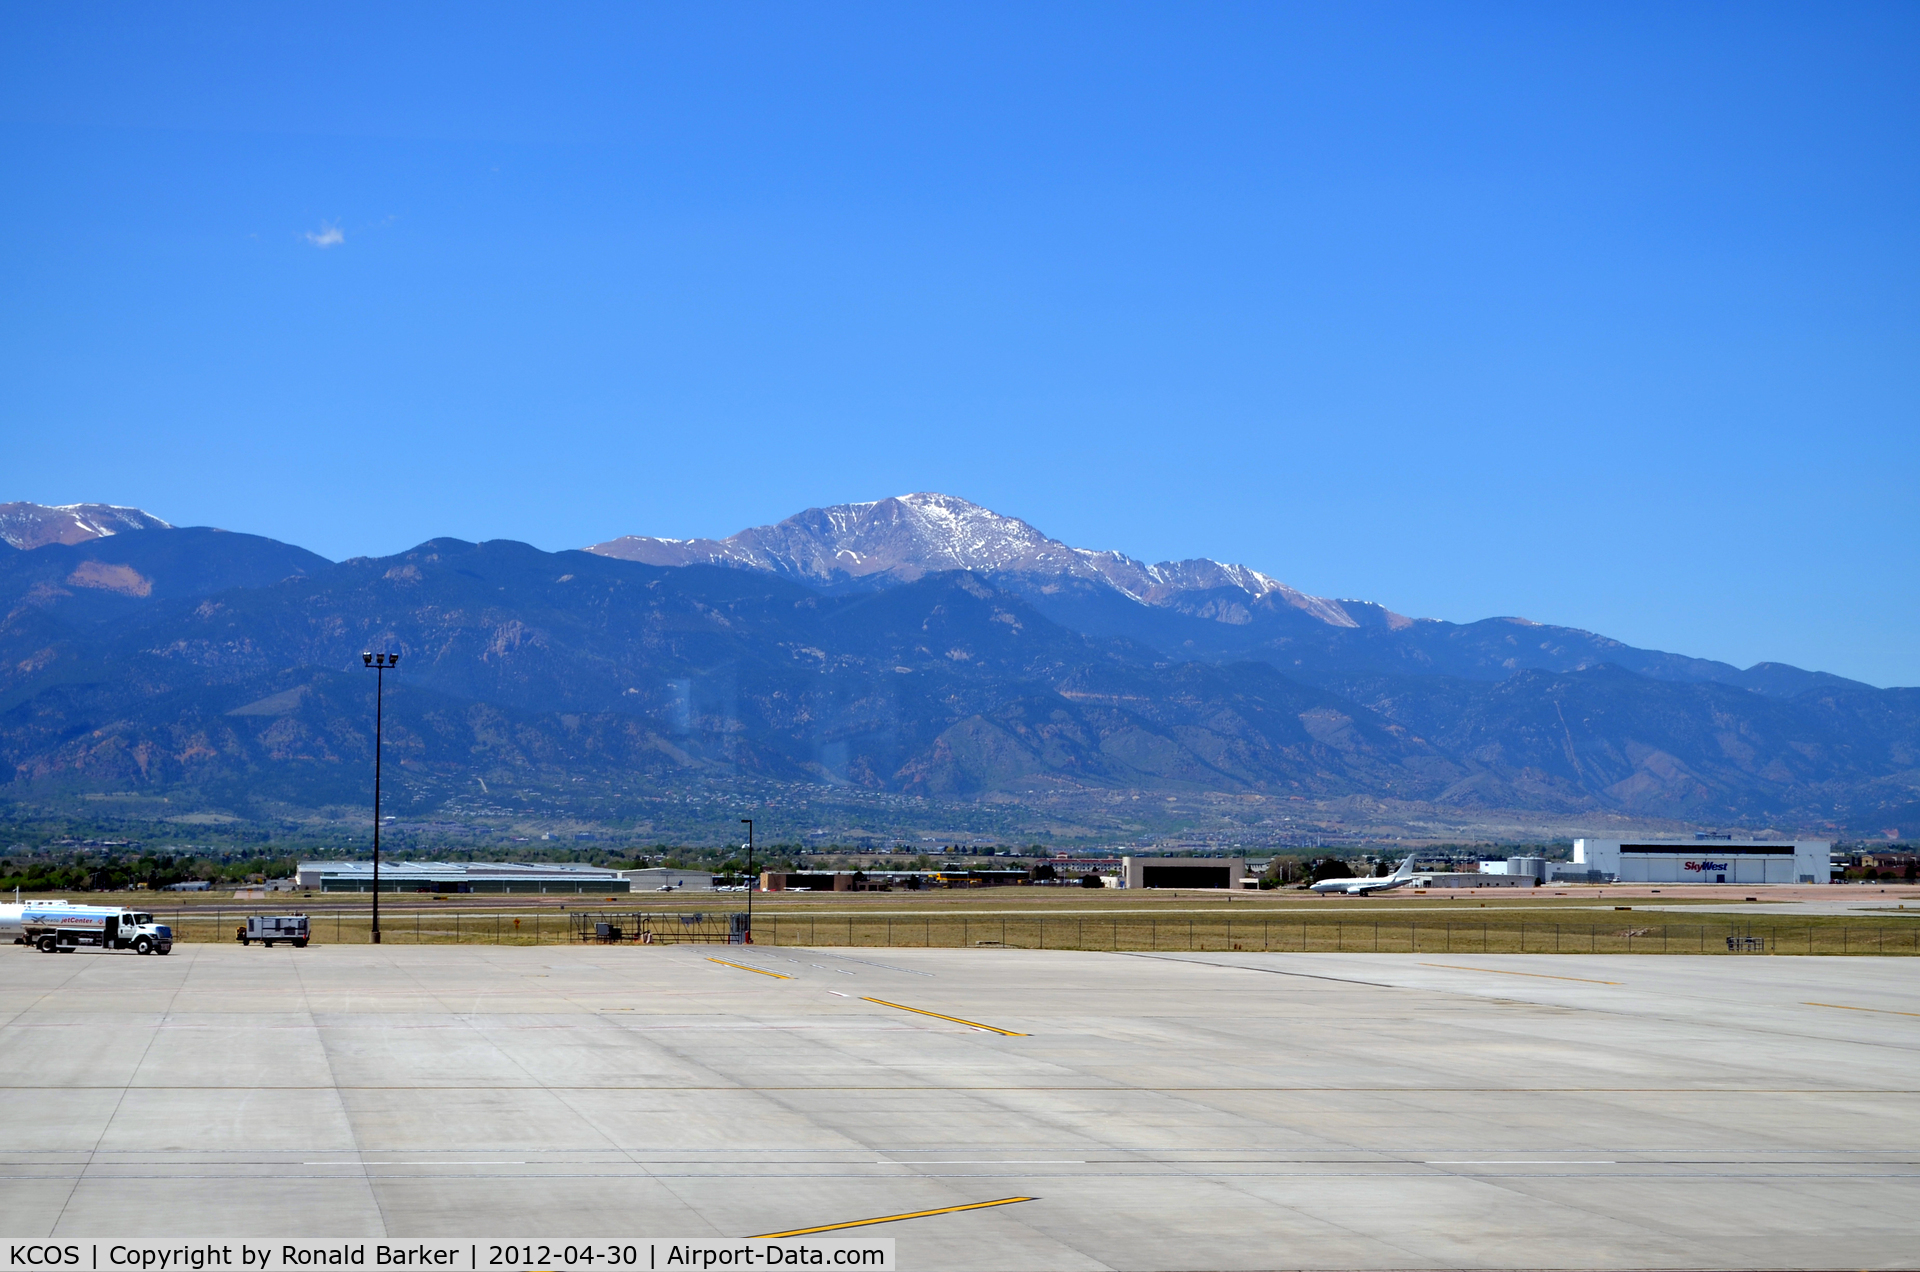 City Of Colorado Springs Municipal Airport (COS) - Pikes Peak from COS